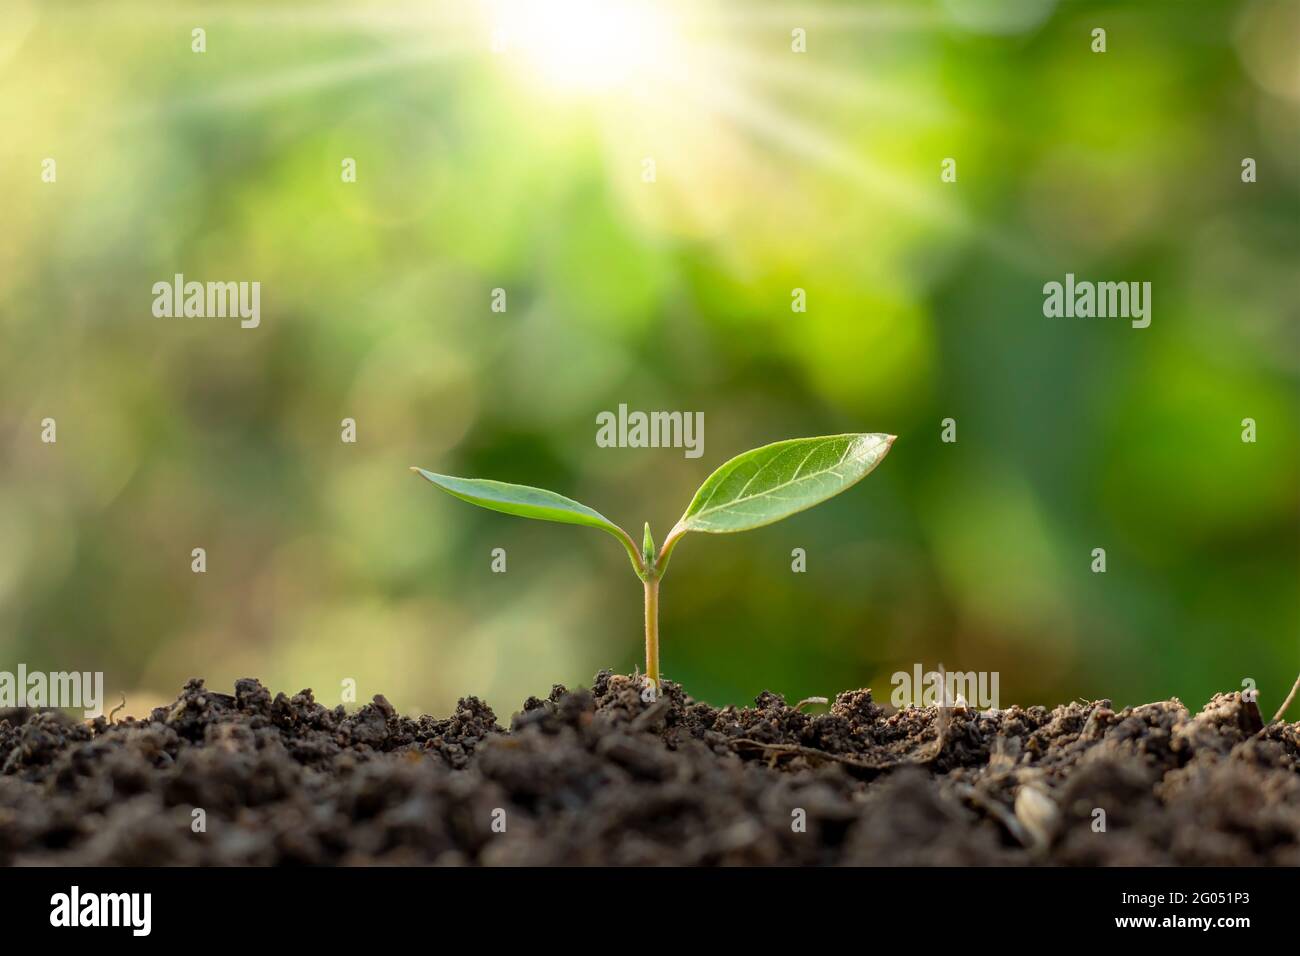 The seedlings grow from fertile soil and the morning sun shines. Ecology and ecological balance concept. Stock Photo